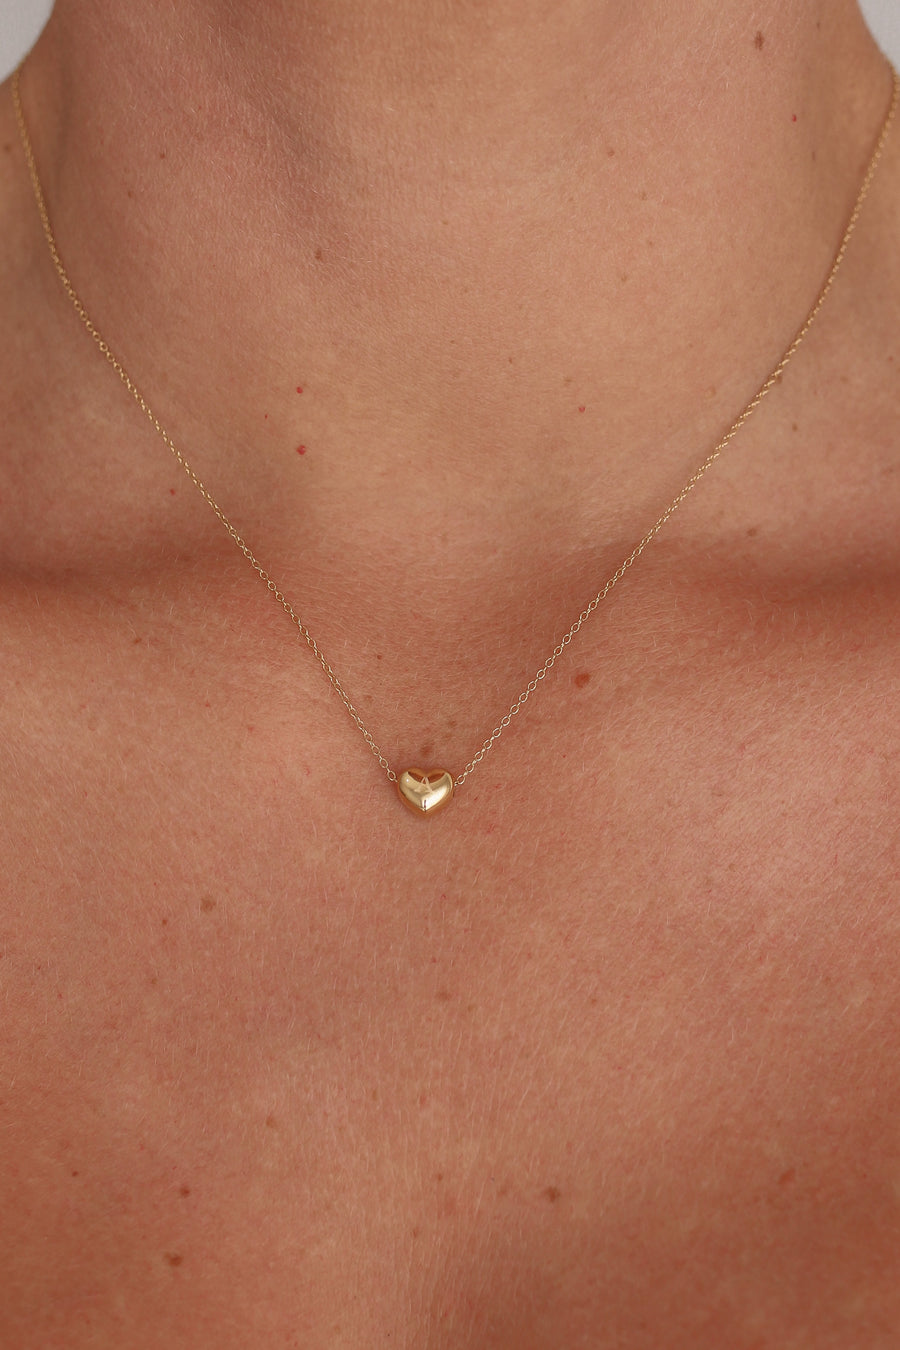 The Mother's Day - 18ct Gold or Silver Stainless Steel Heart Necklace